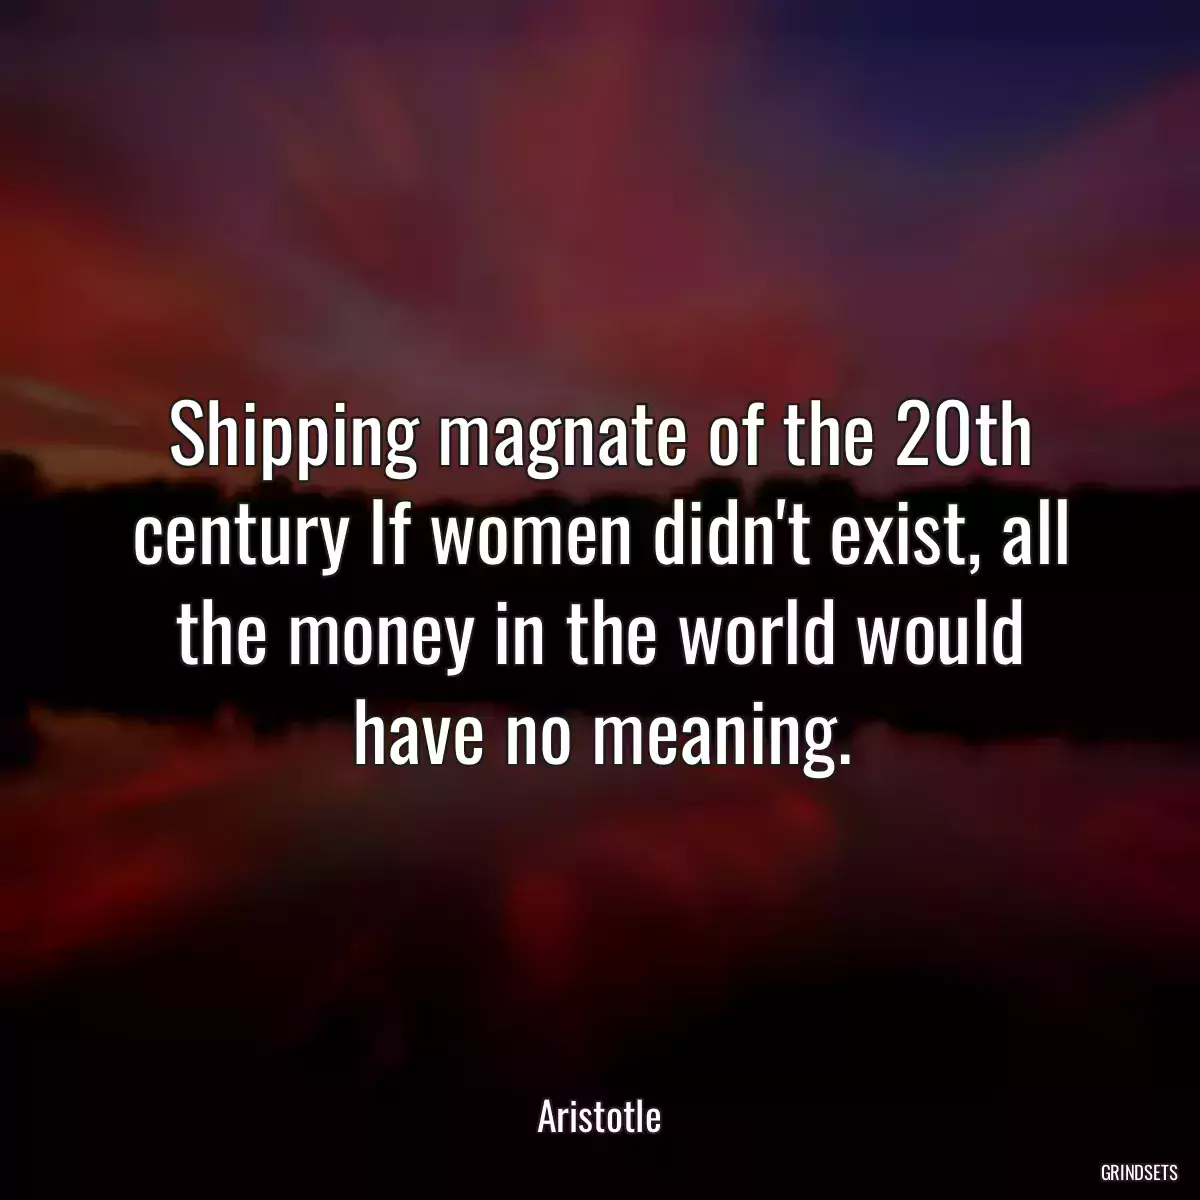 Shipping magnate of the 20th century If women didn\'t exist, all the money in the world would have no meaning.